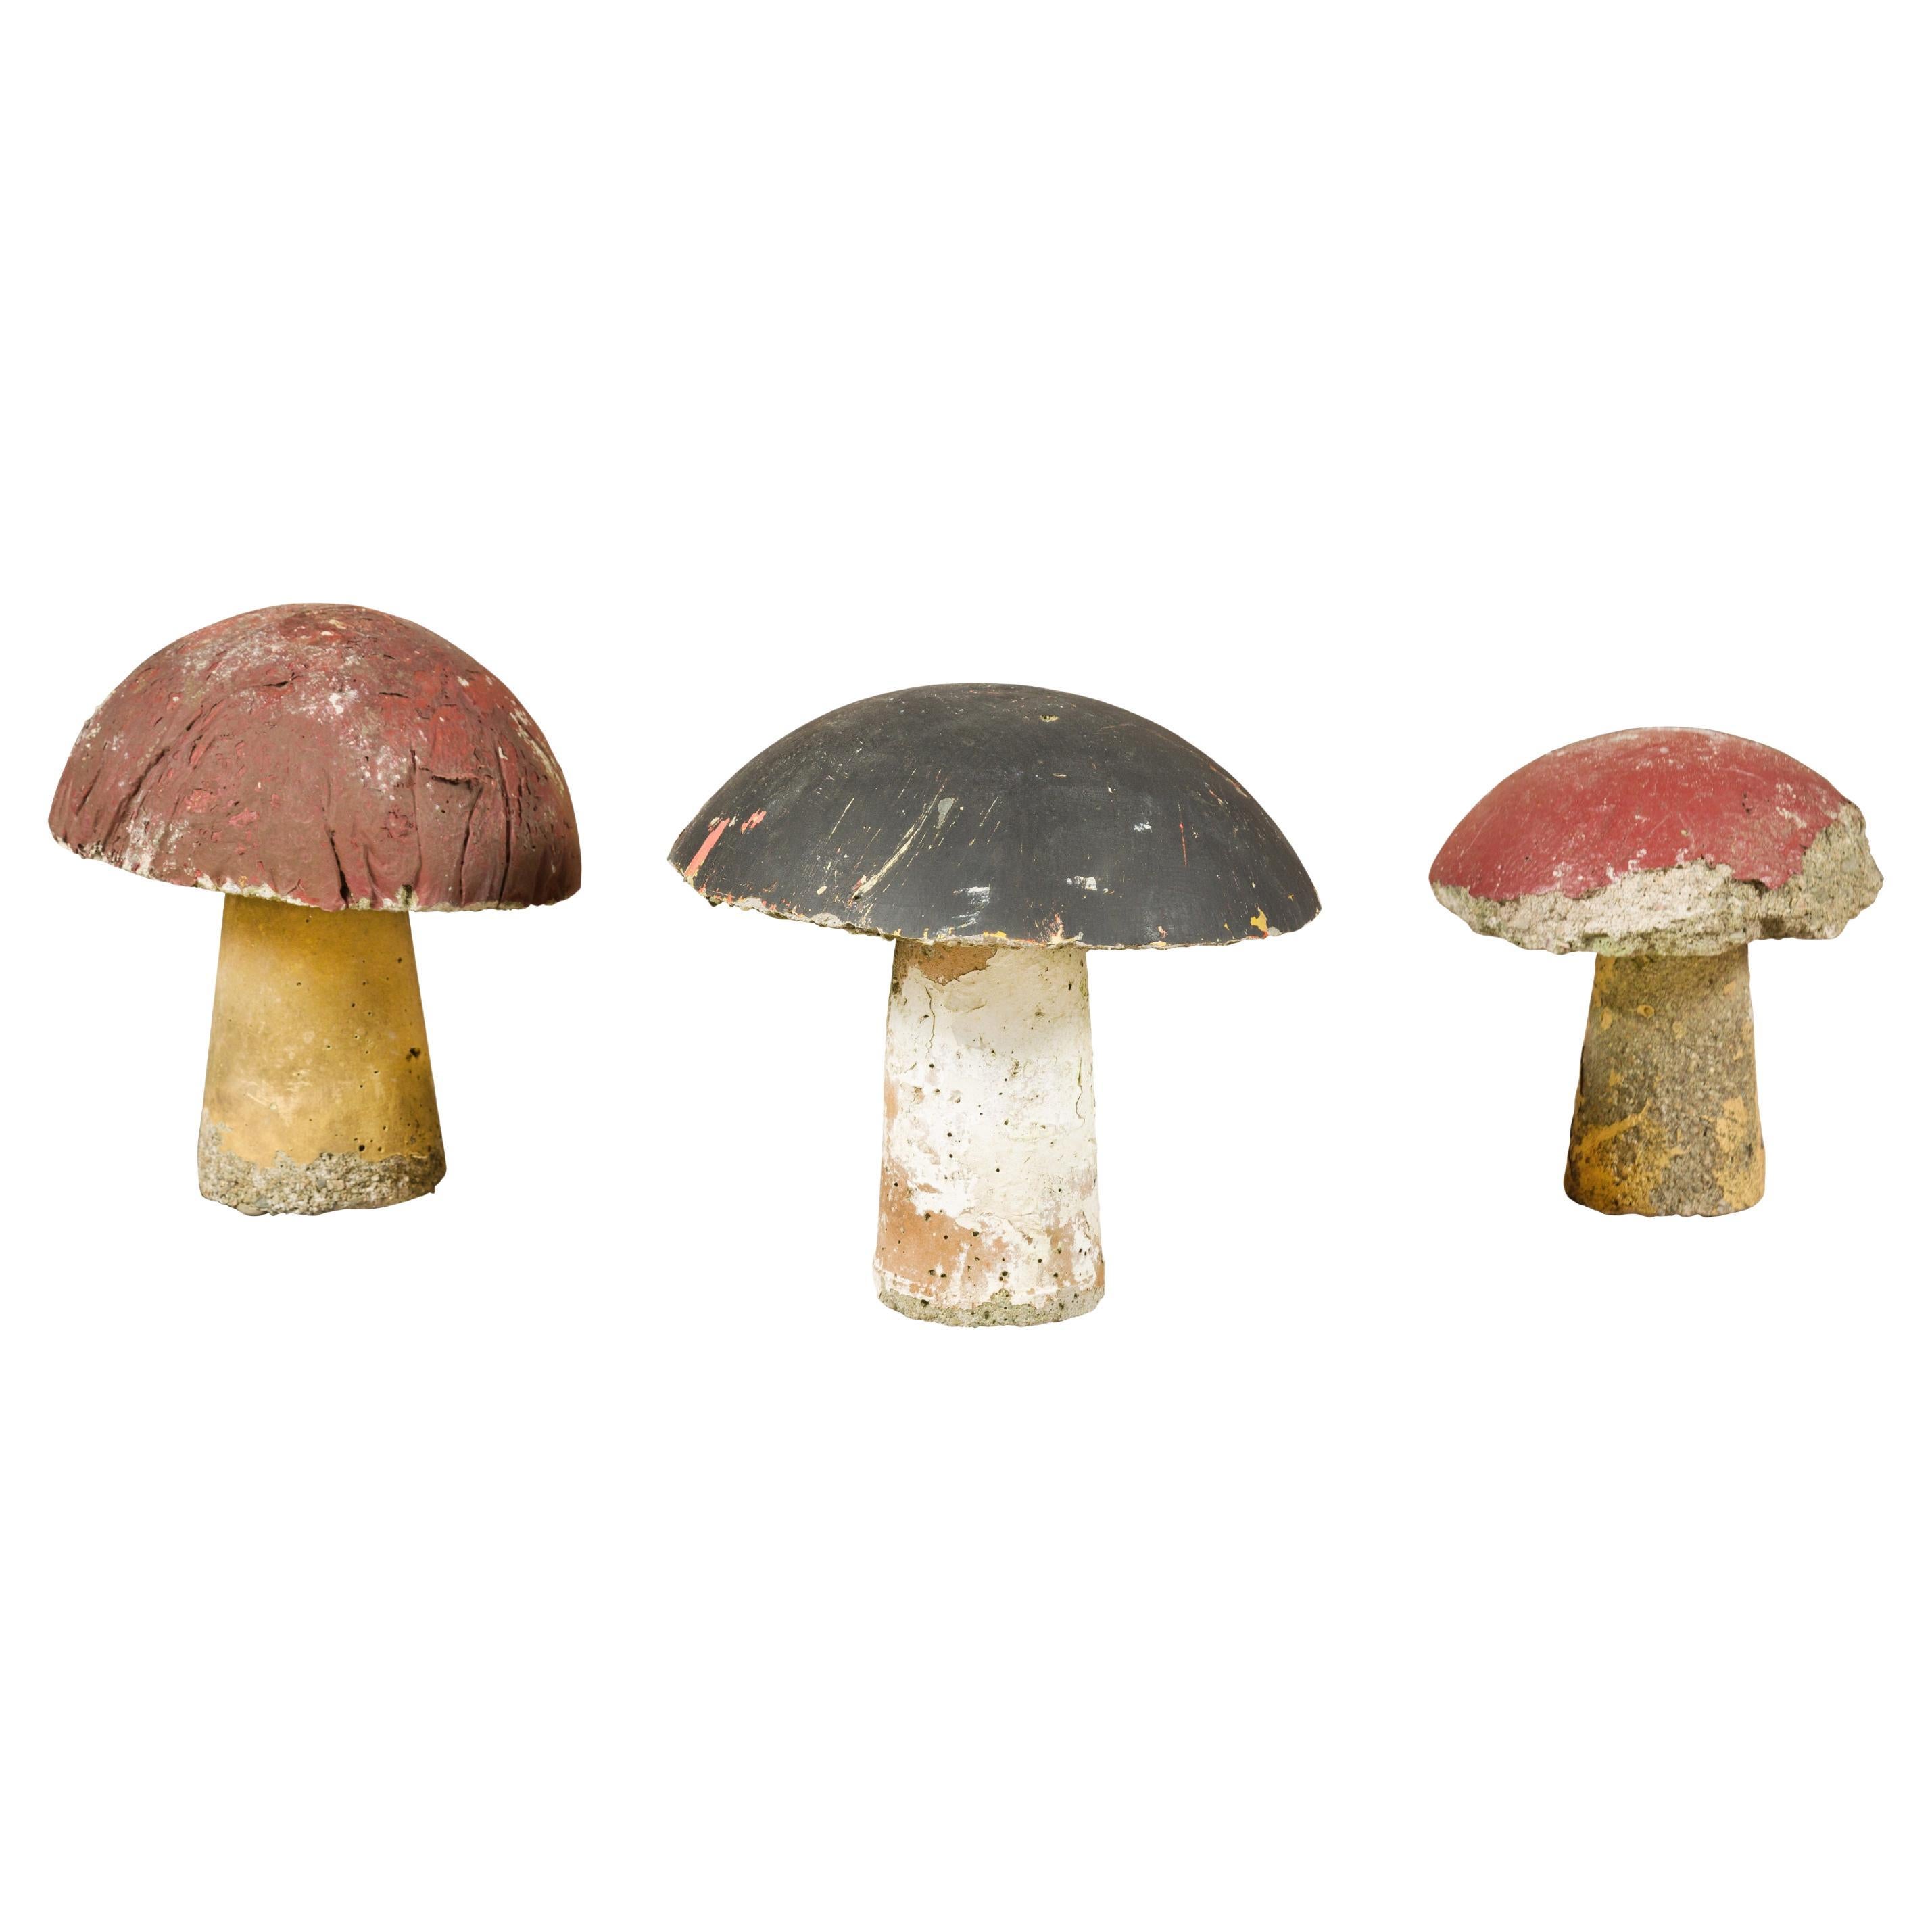 Set of Three American Midcentury Painted Concrete Mushroom Garden Ornaments For Sale